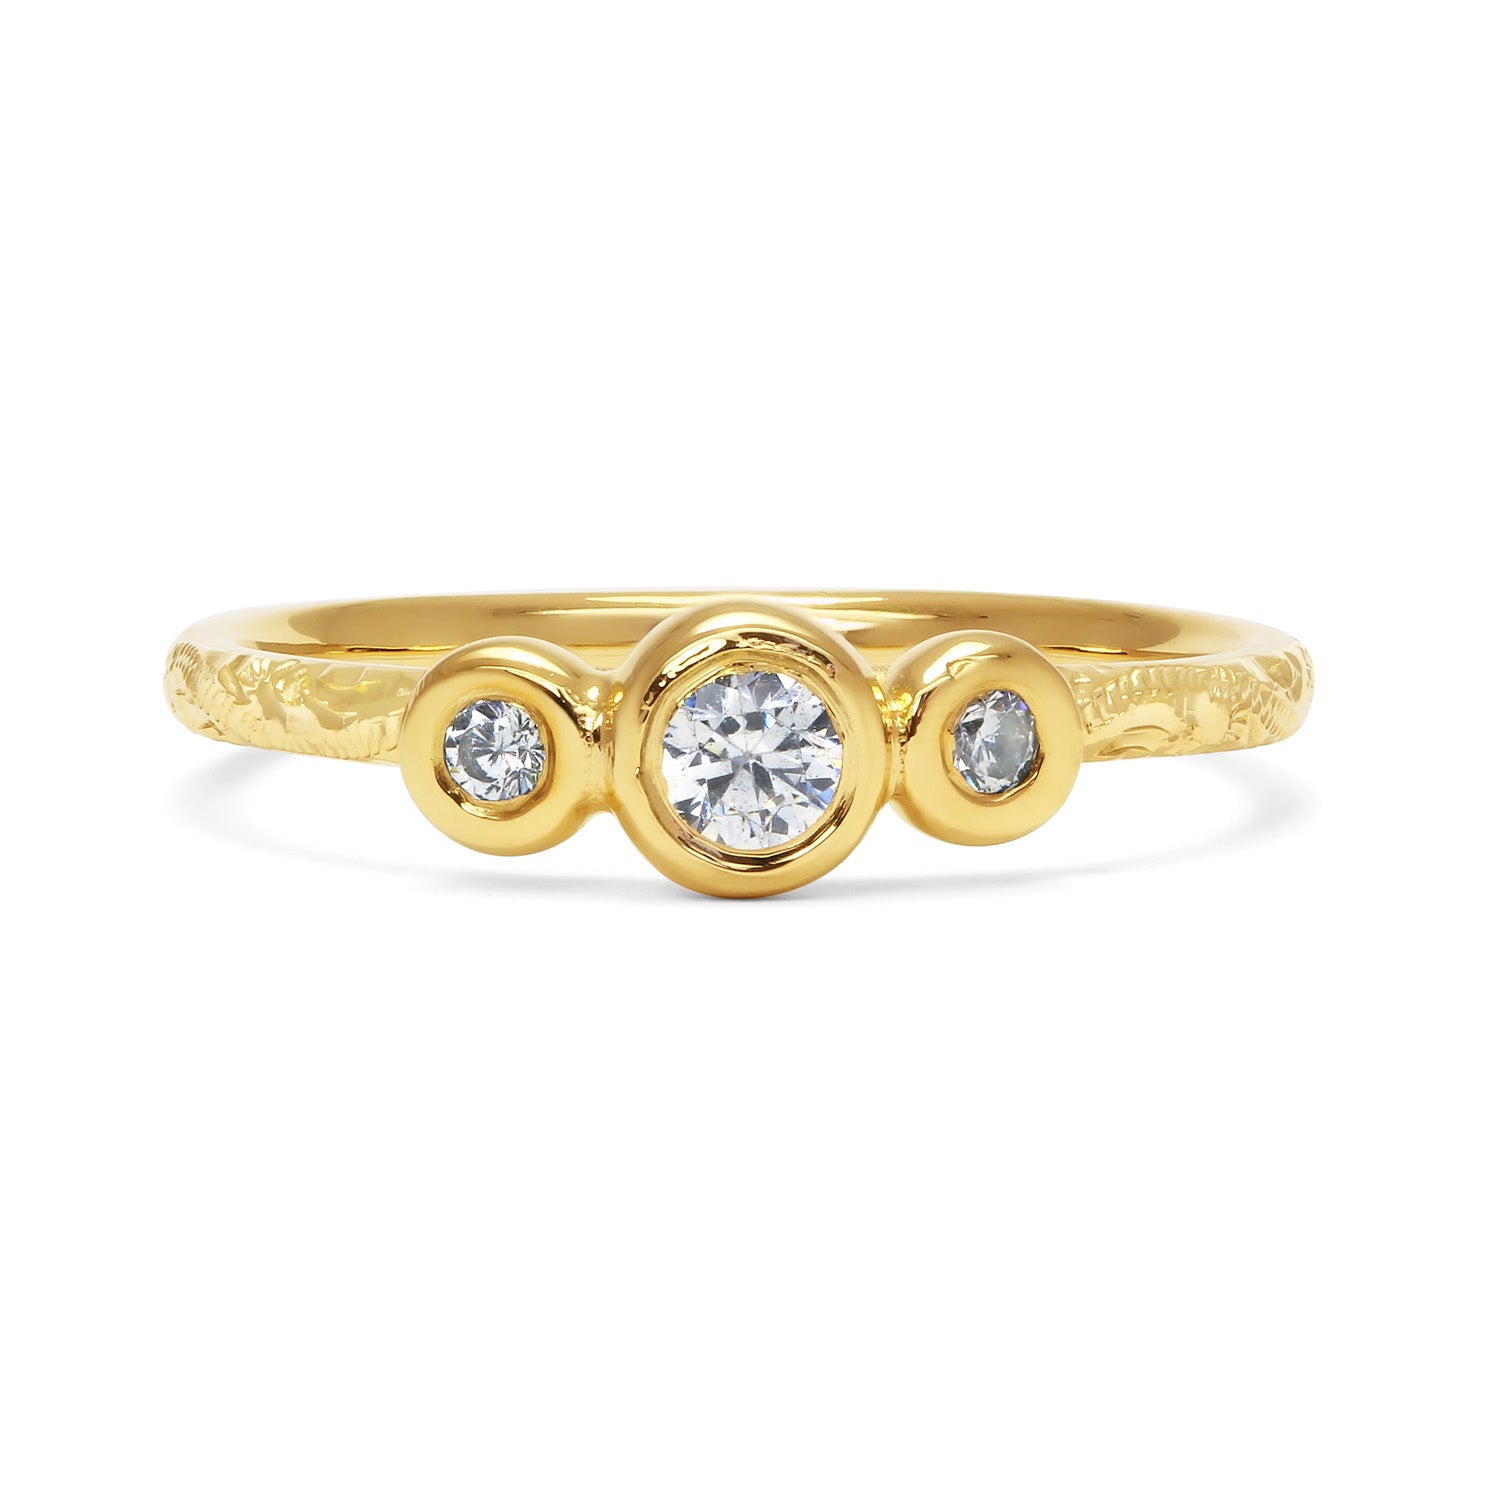 Demeter Trilogy Ethical Diamond Engagement Ring, Gold